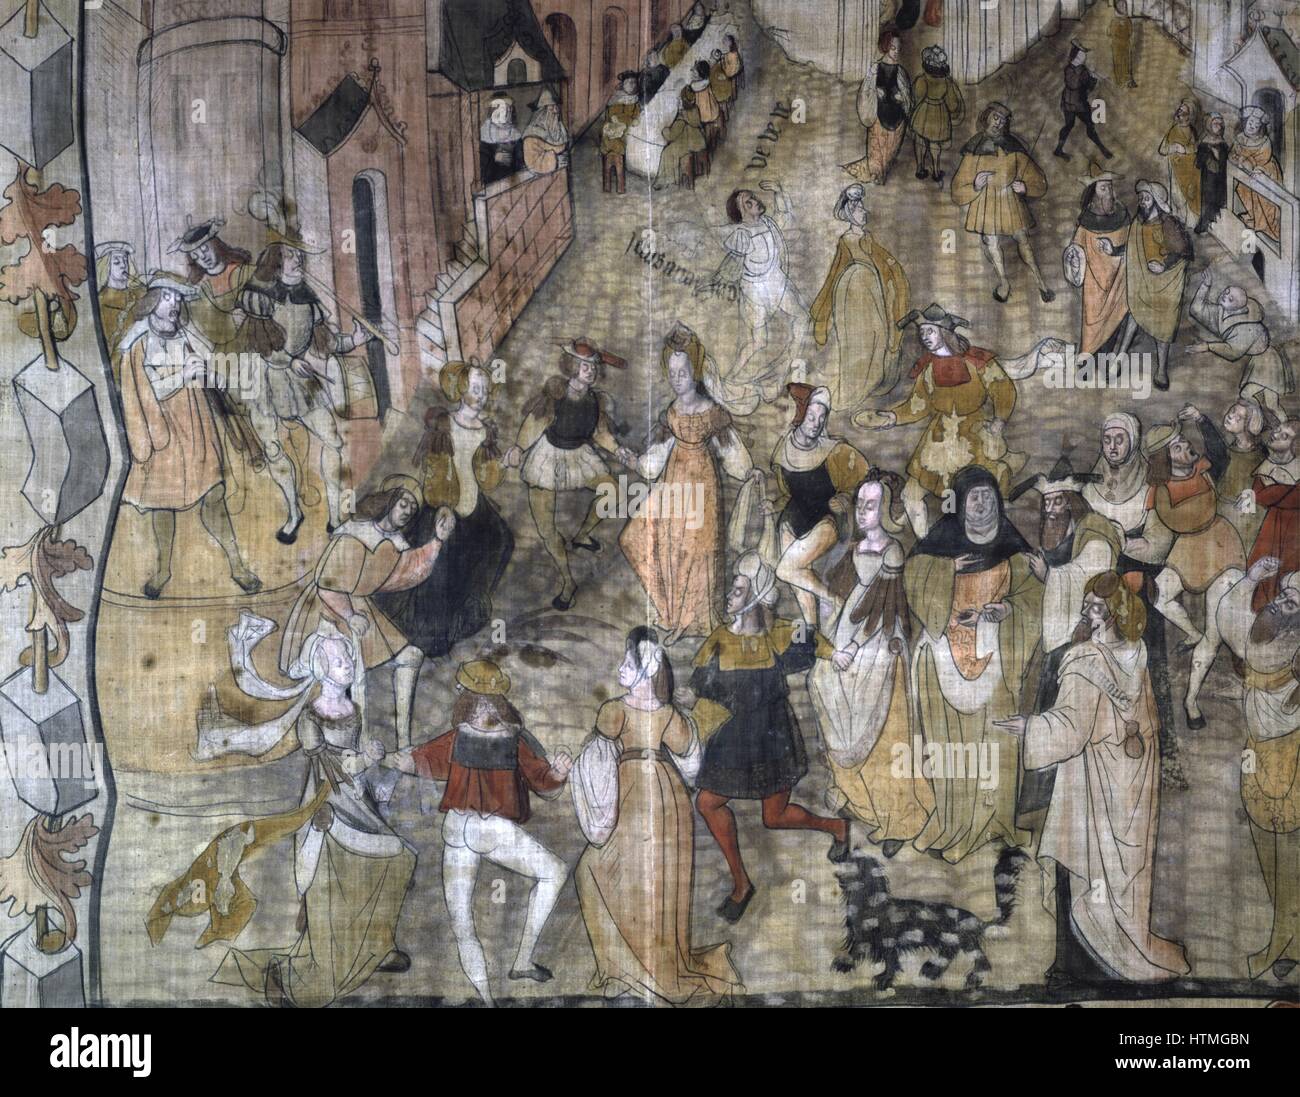 Le mystere de la vengeance de Notre Seigneur (Story of the Vengeance of our Lord, Jesus Christ) medieval French mystery play based around the destruction of Jerusalem during the Jewish War of 66-70. Detail showing Jews dancing in Jerusalem to the sound of Stock Photo